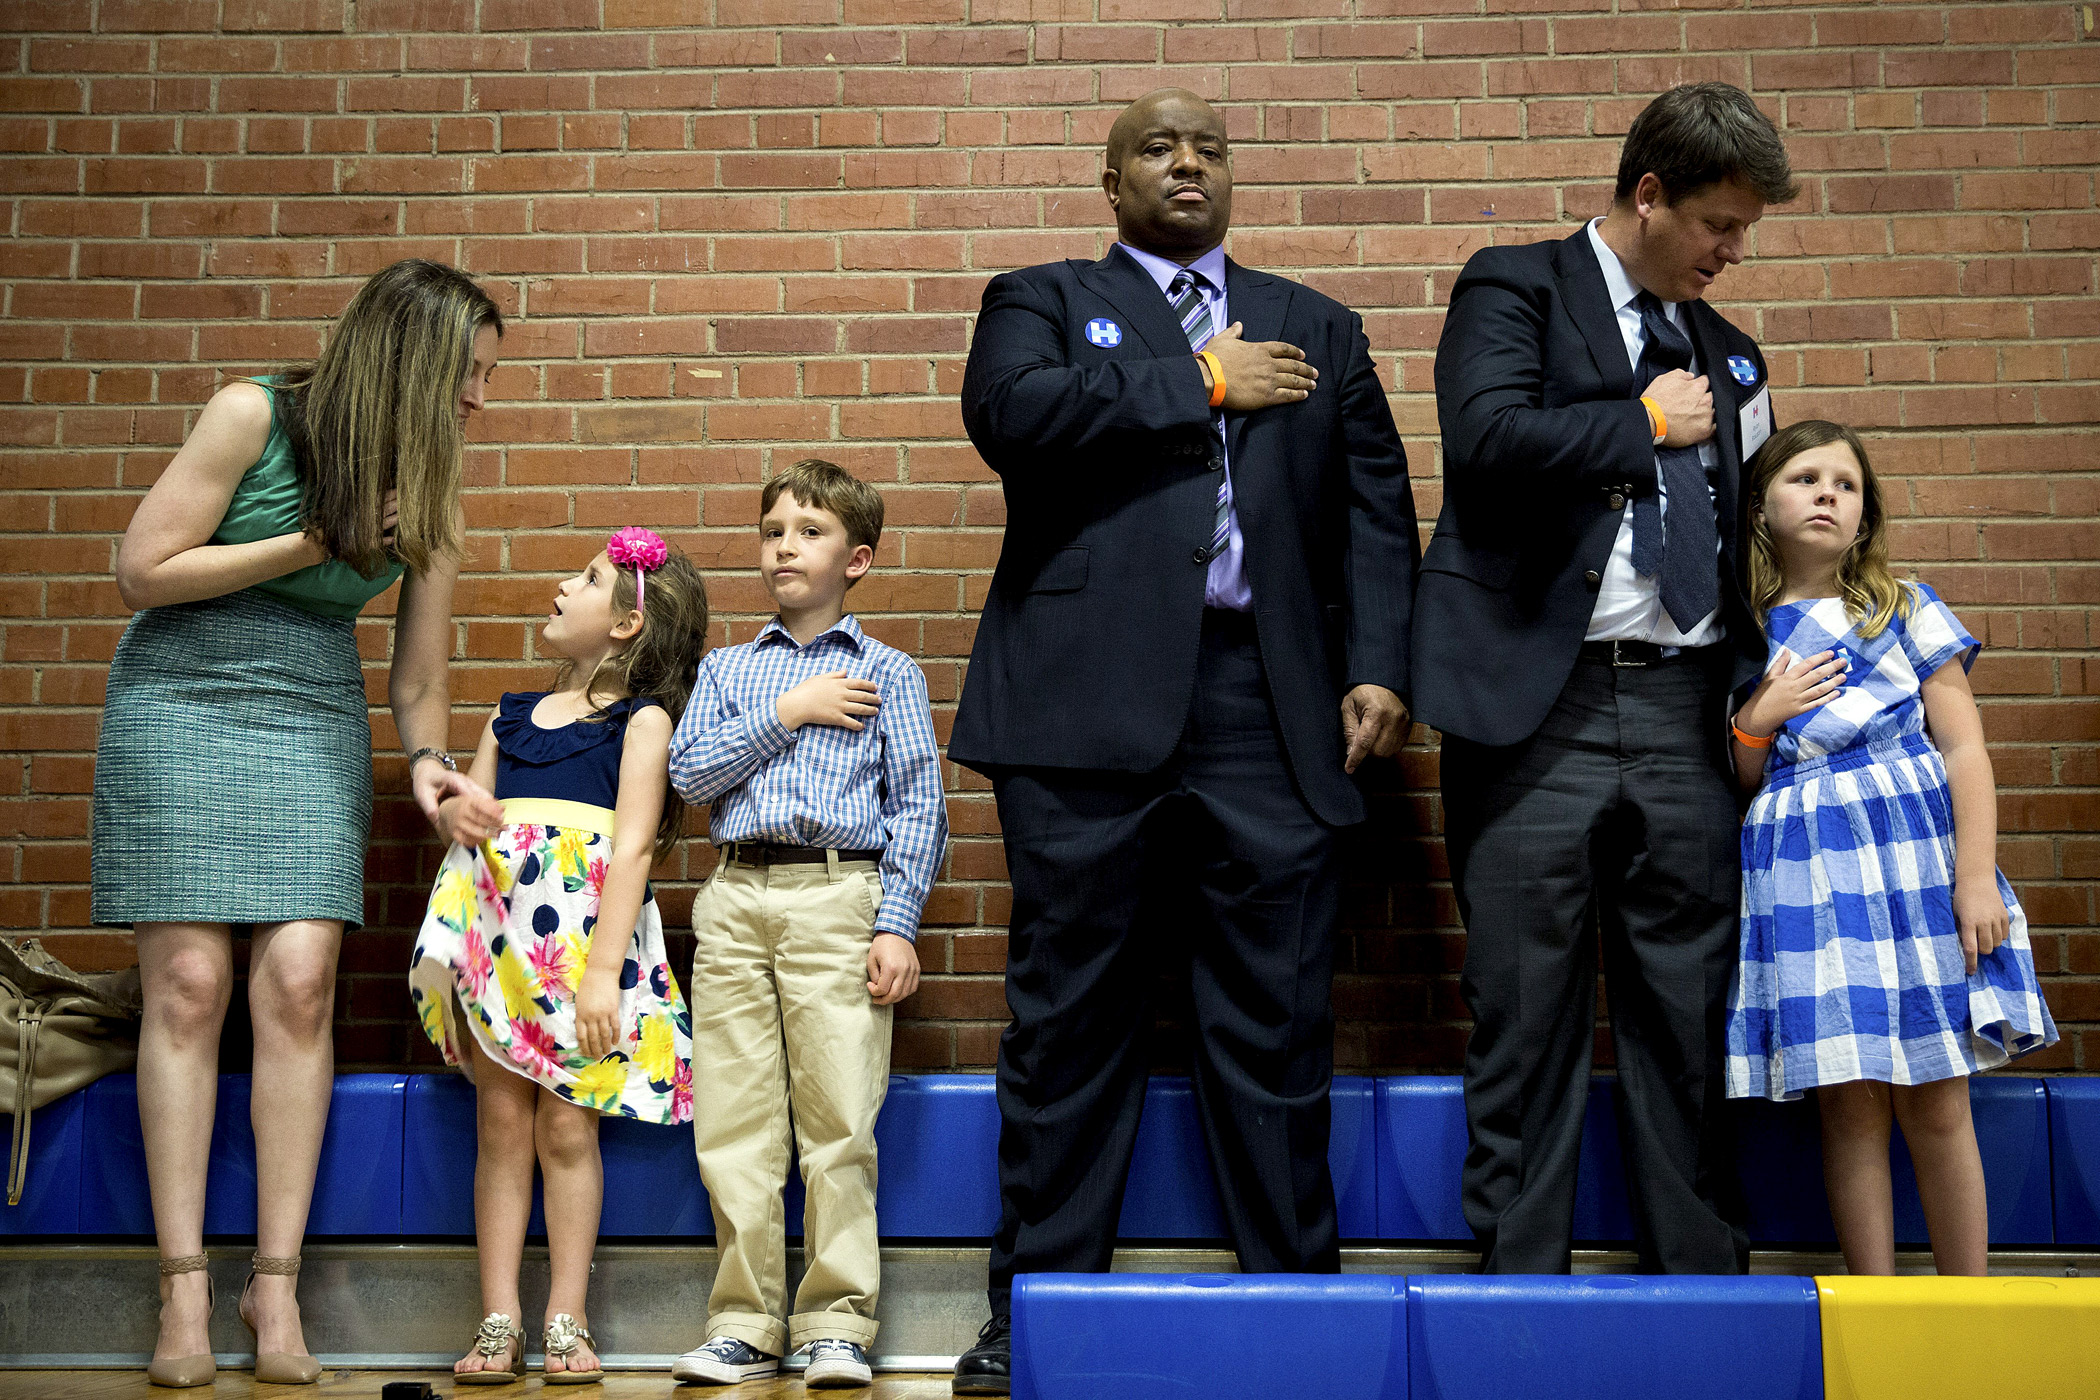 Members of the audience recite the Pledge of Allegiance before Hillary Clinton speaks in Phoenix, Ariz., on March 21.